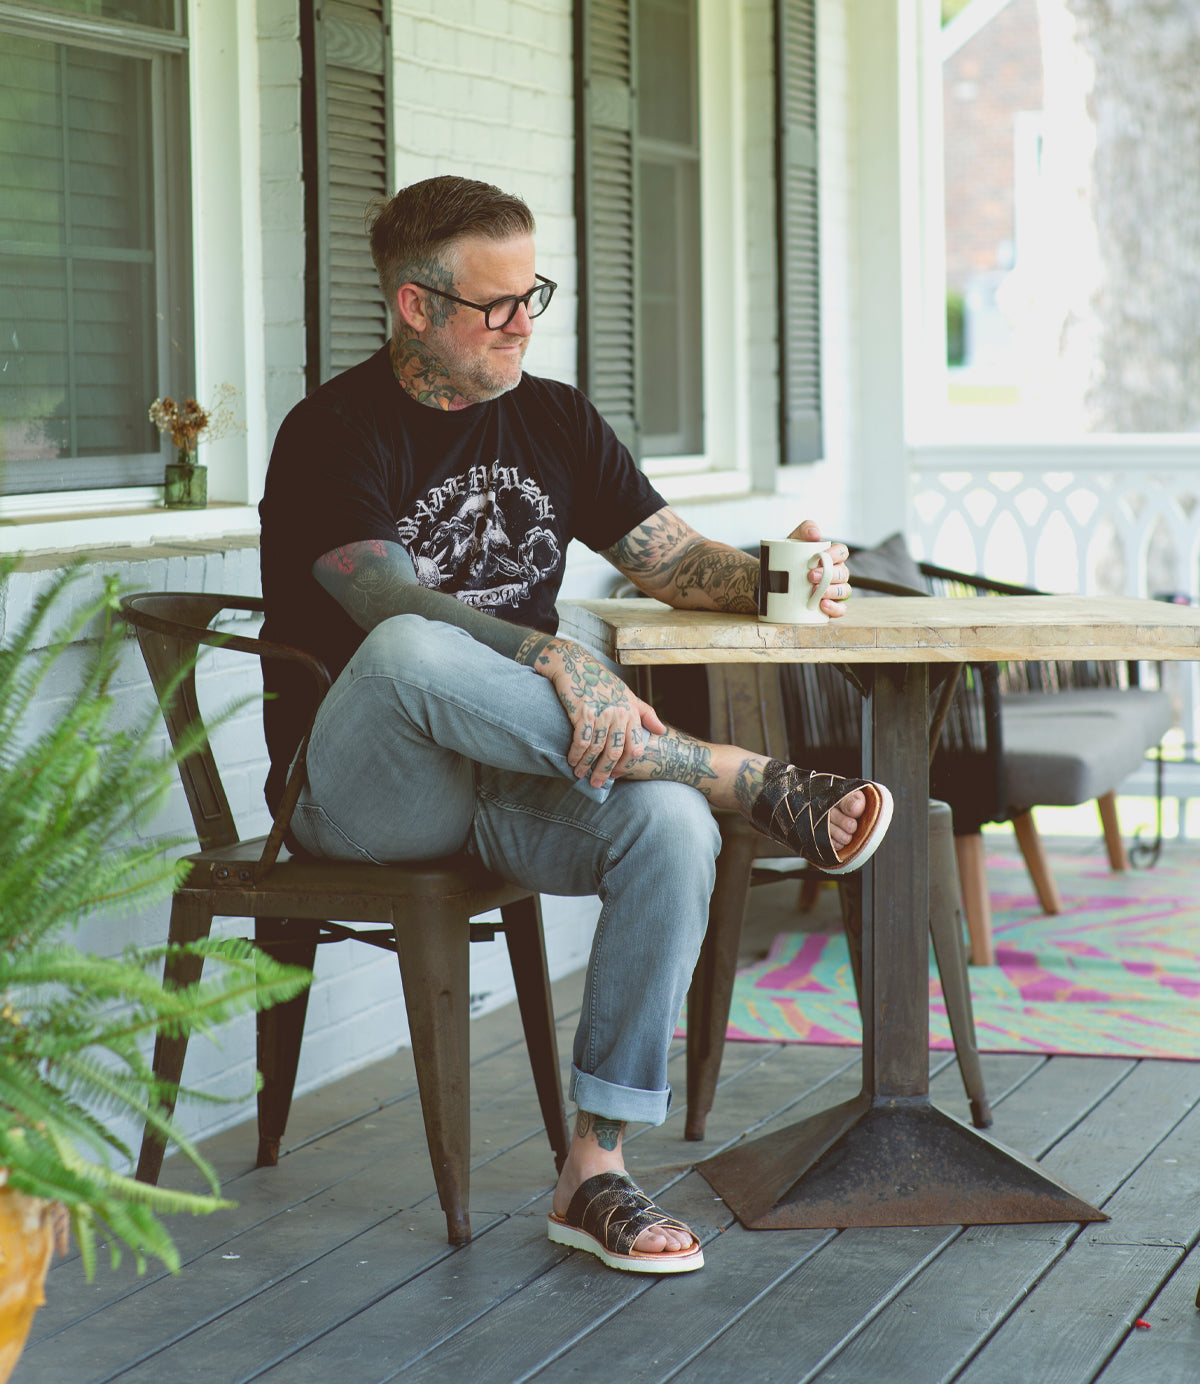 A tattooed man wearing glasses, a black t-shirt, and gray pants sits at a wooden table on a porch, holding an Abraham Light mug and wearing Bed Stu leather sandals.